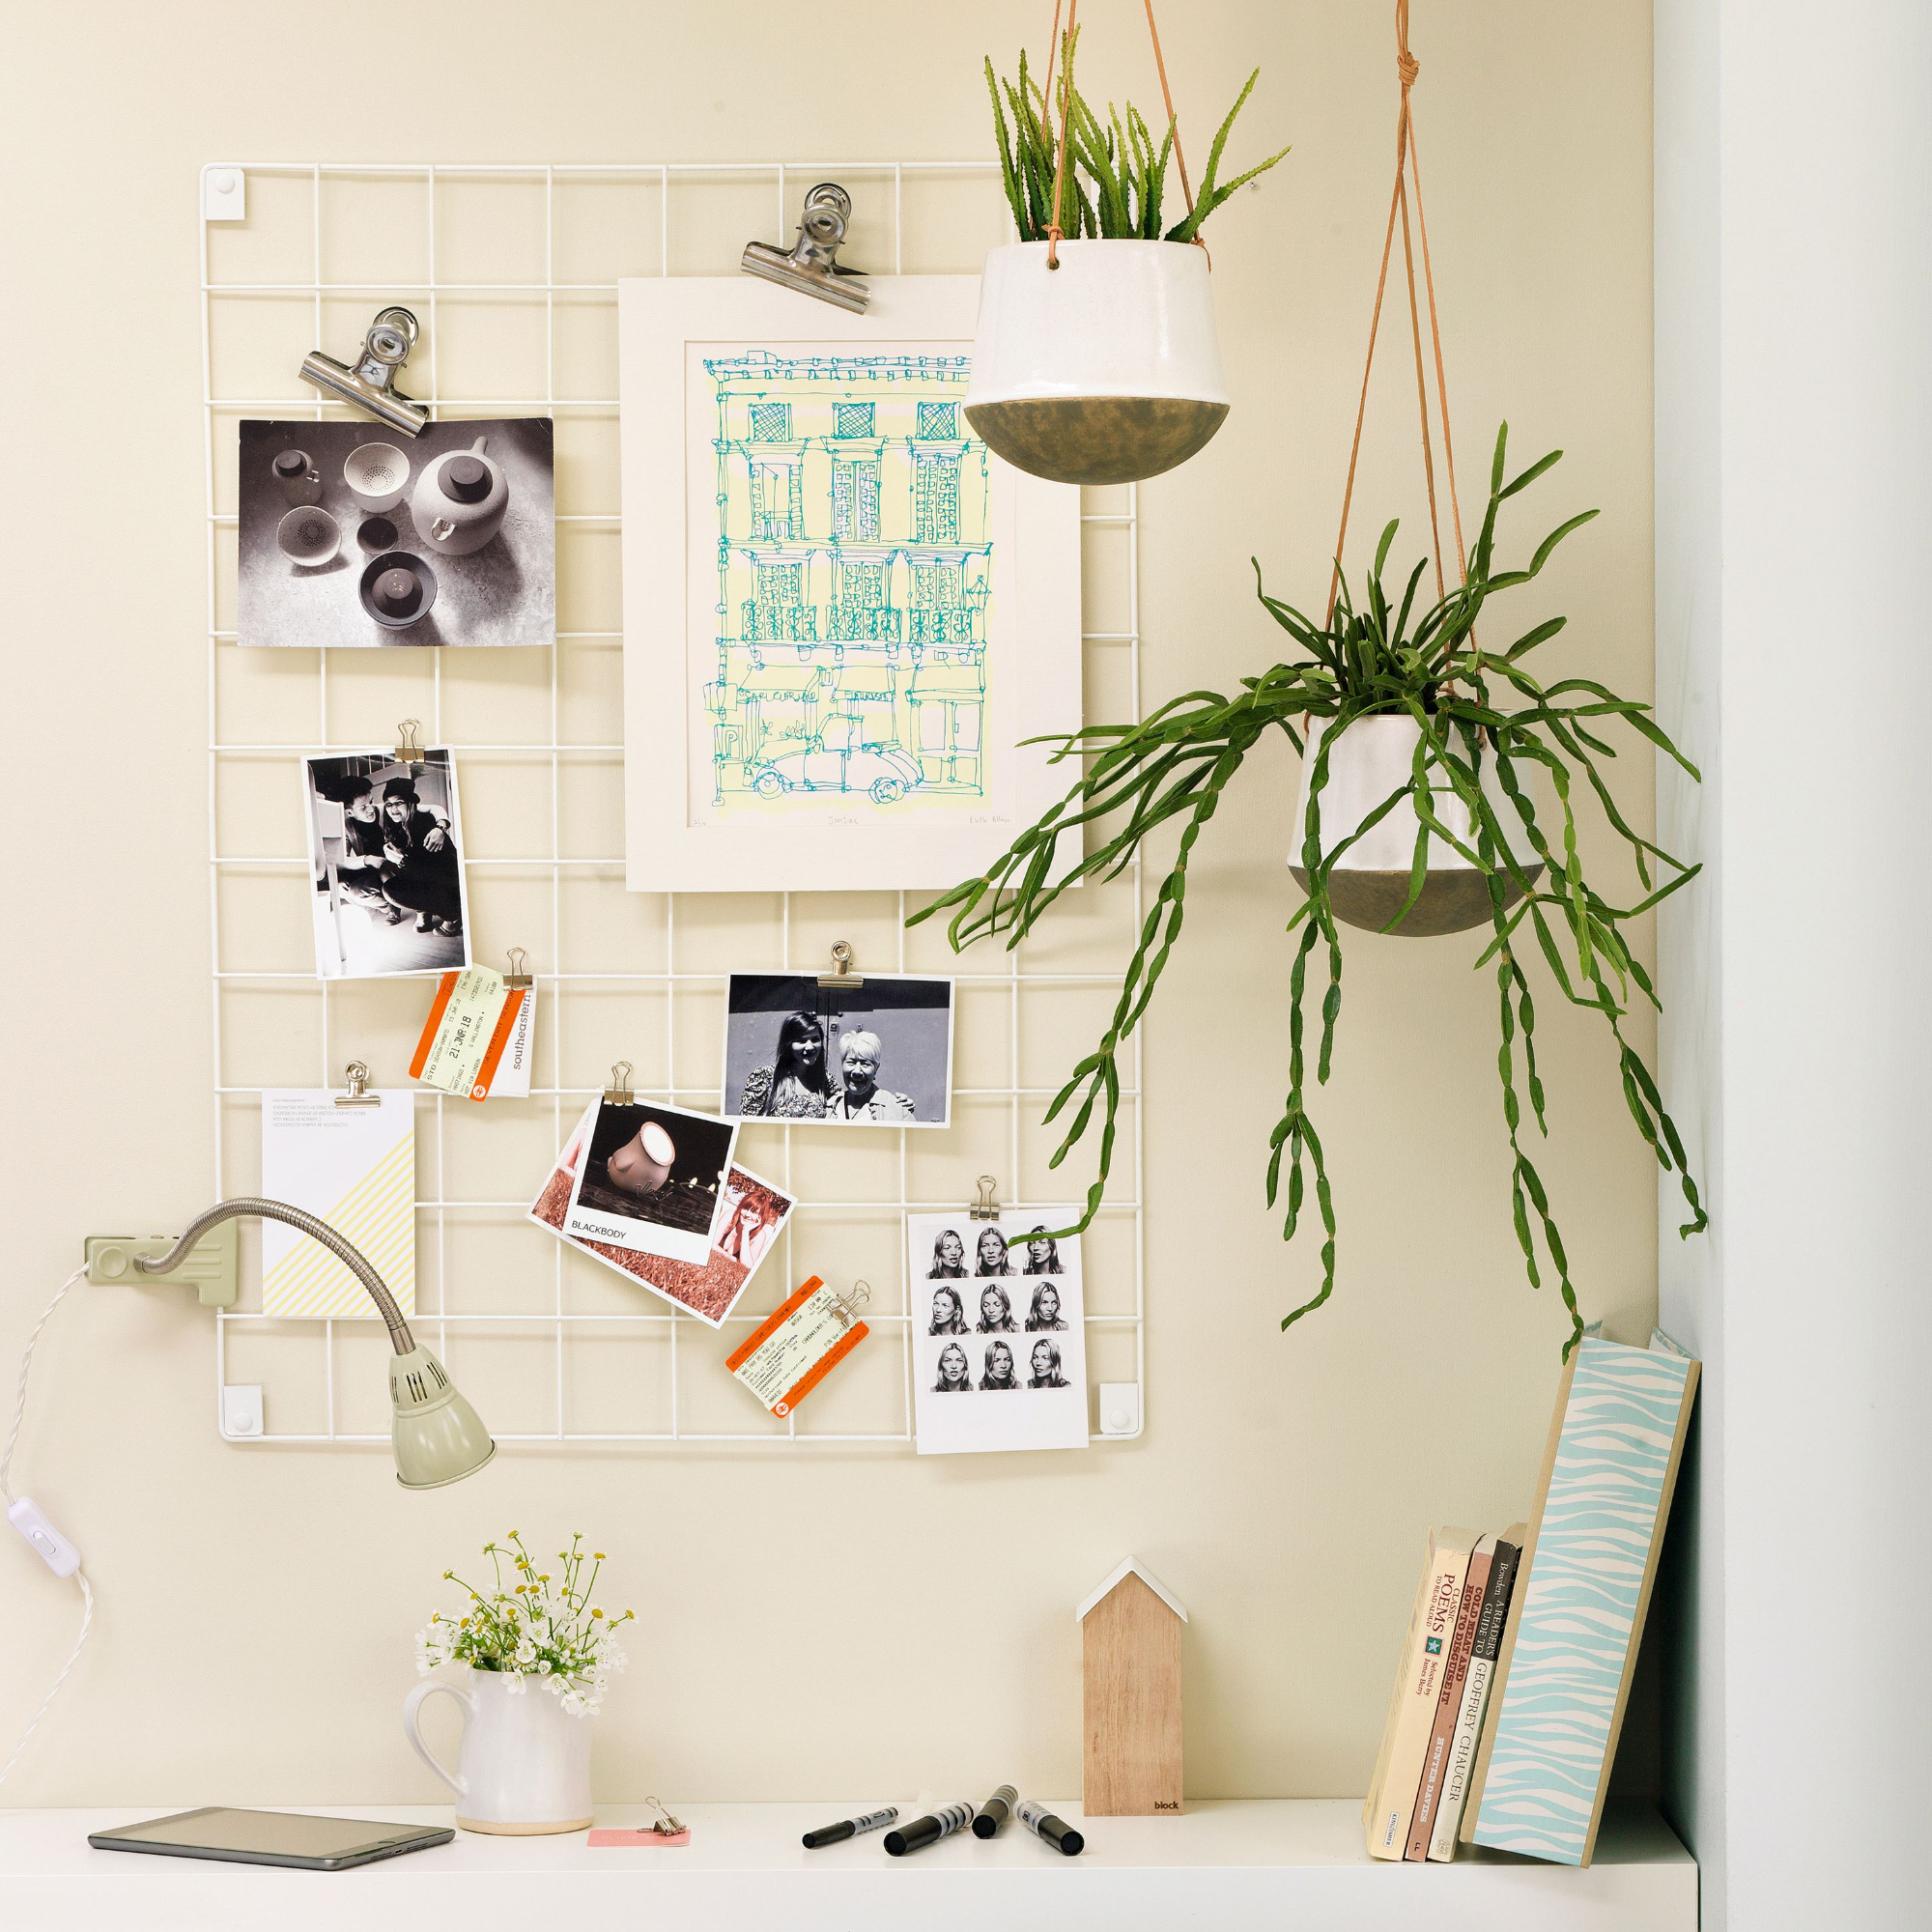 Home office desk setup with wired grid decor displaying photos and artwork